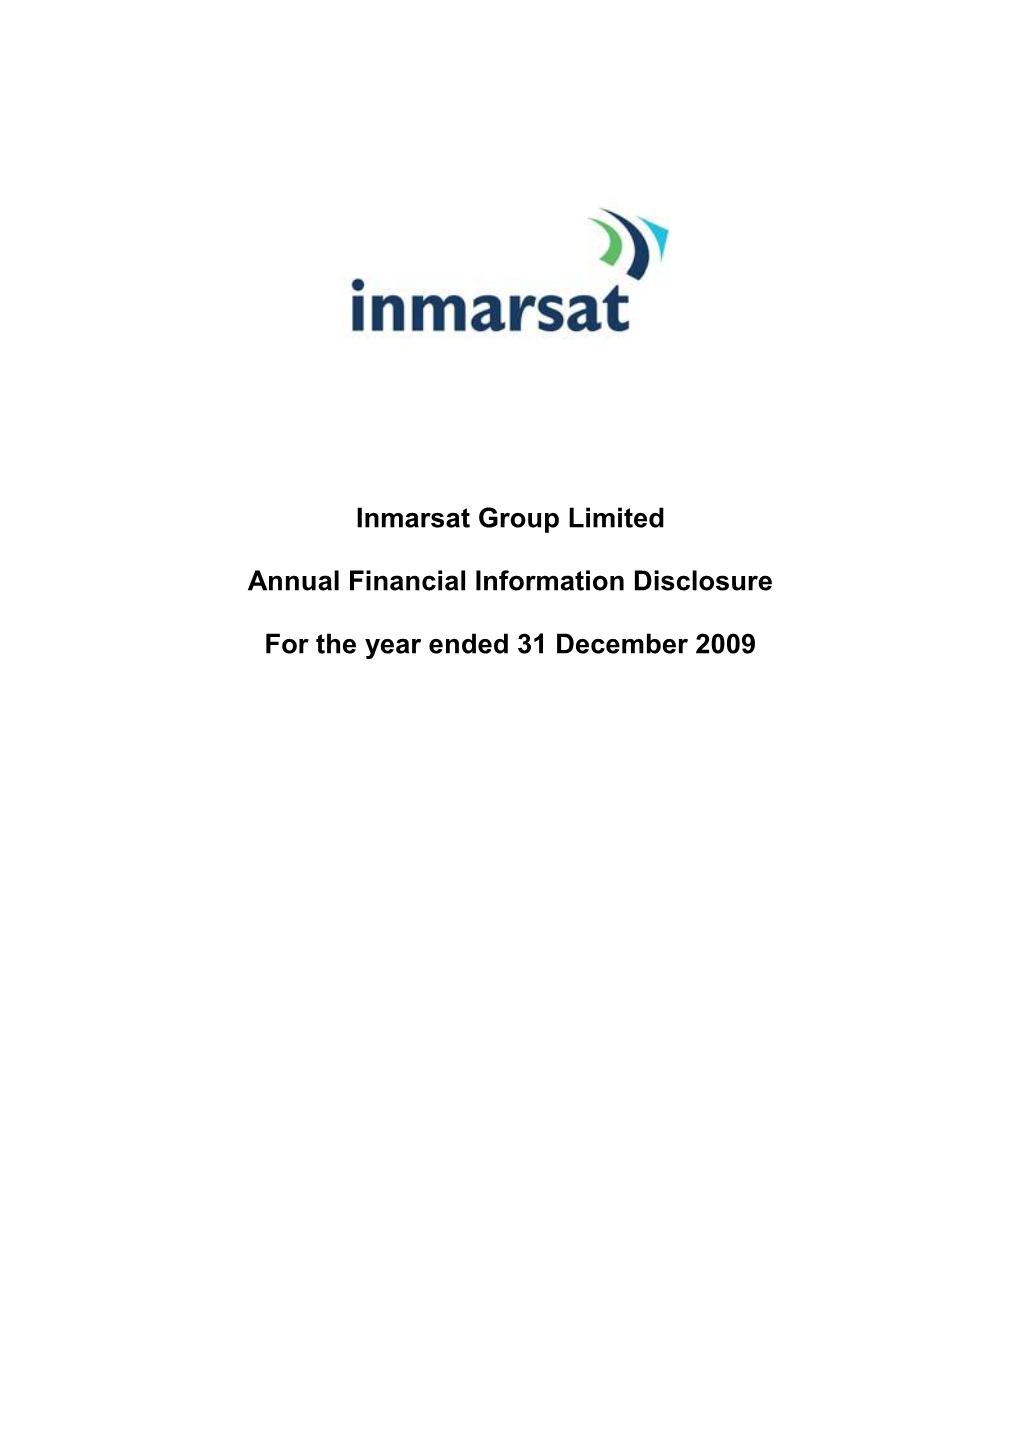 Inmarsat Group Limited